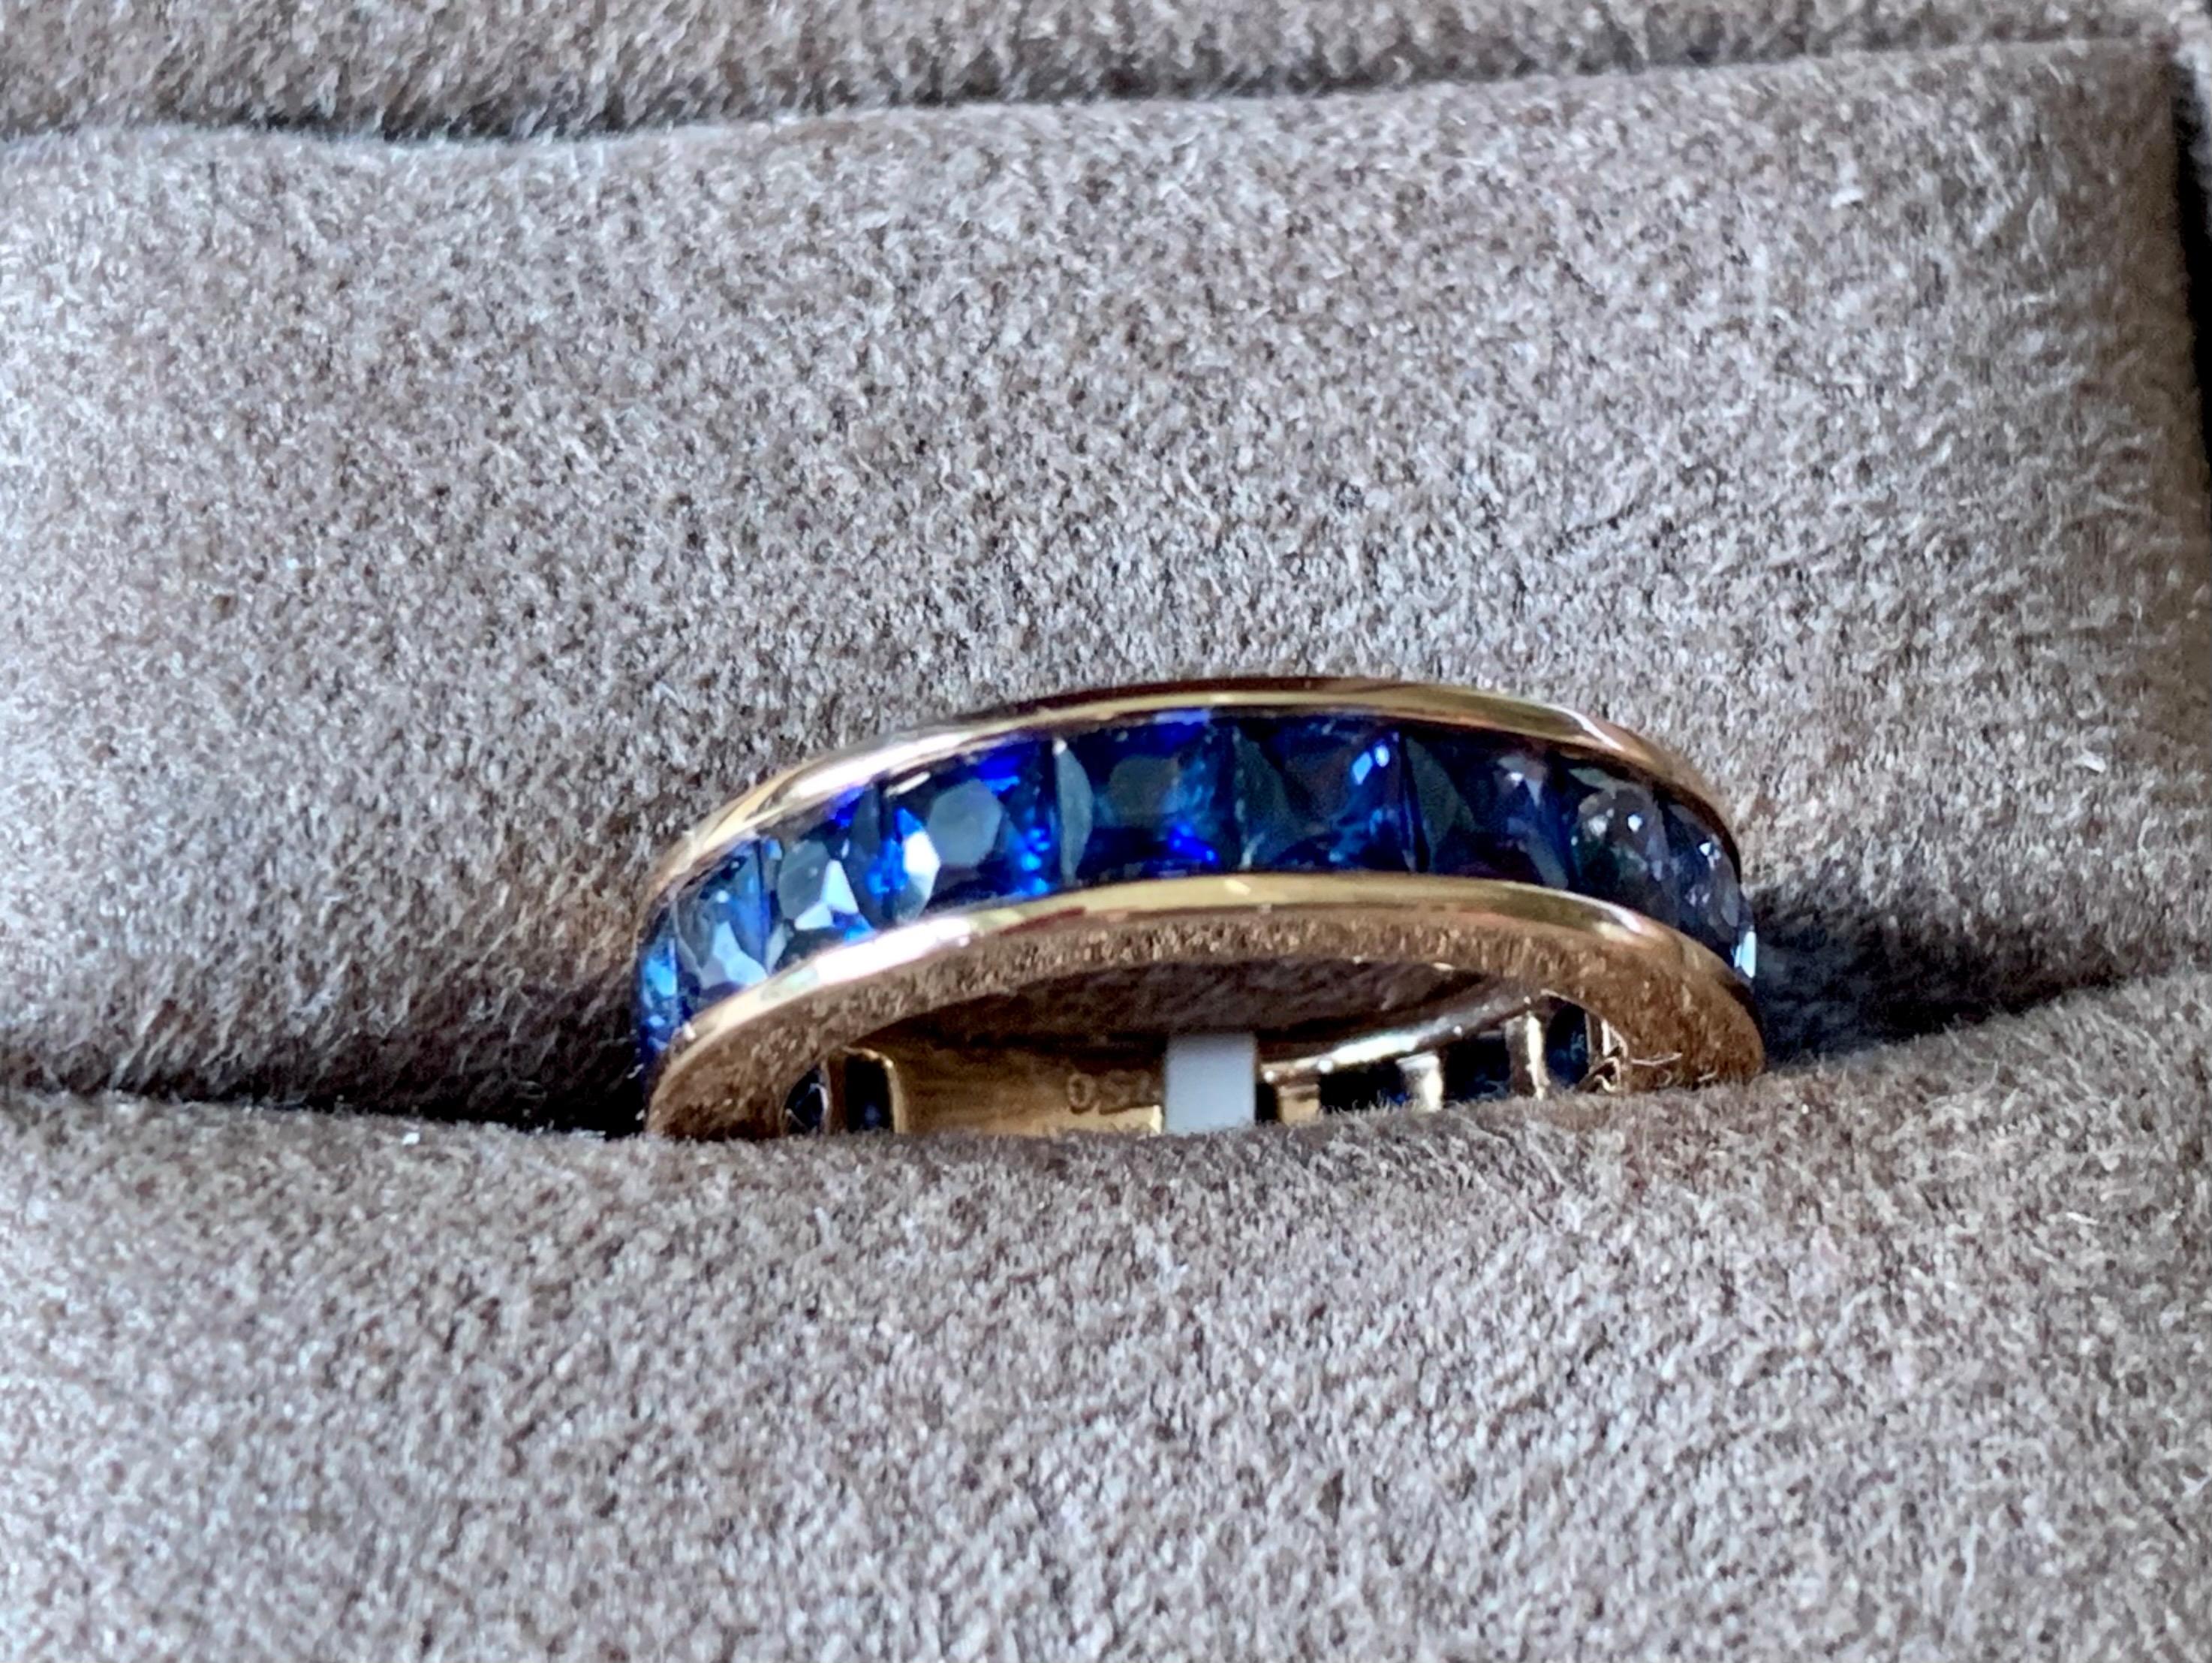 Solid 18 K rose Gold Eternity Ring set with 18 square cut french cut blue Sapphires in a channel setting. 
Each  stone is faceted and well-matched in shape and color. Natural variations in hue and intensity add to the beauty of this ring. Wear it